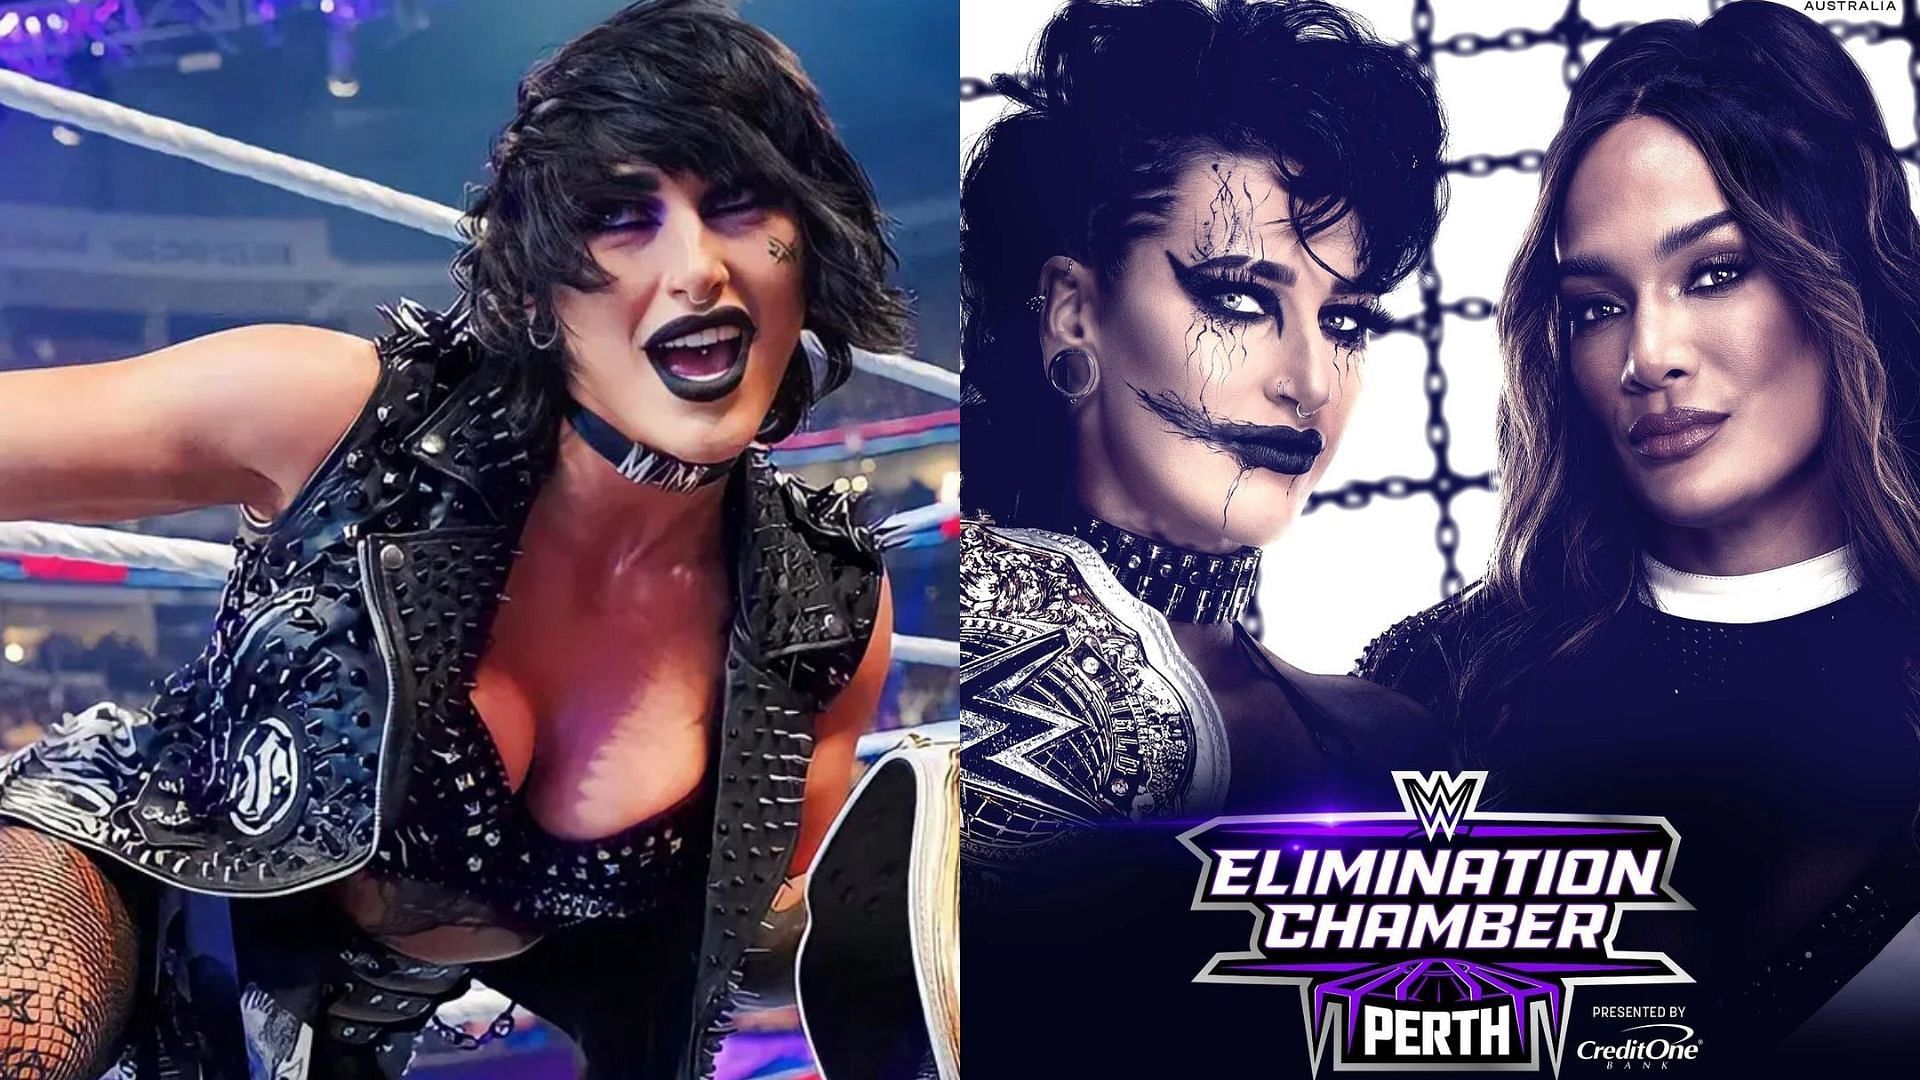 Rhea Ripley will defend her title against Nia Jax at Elimination Chamber.